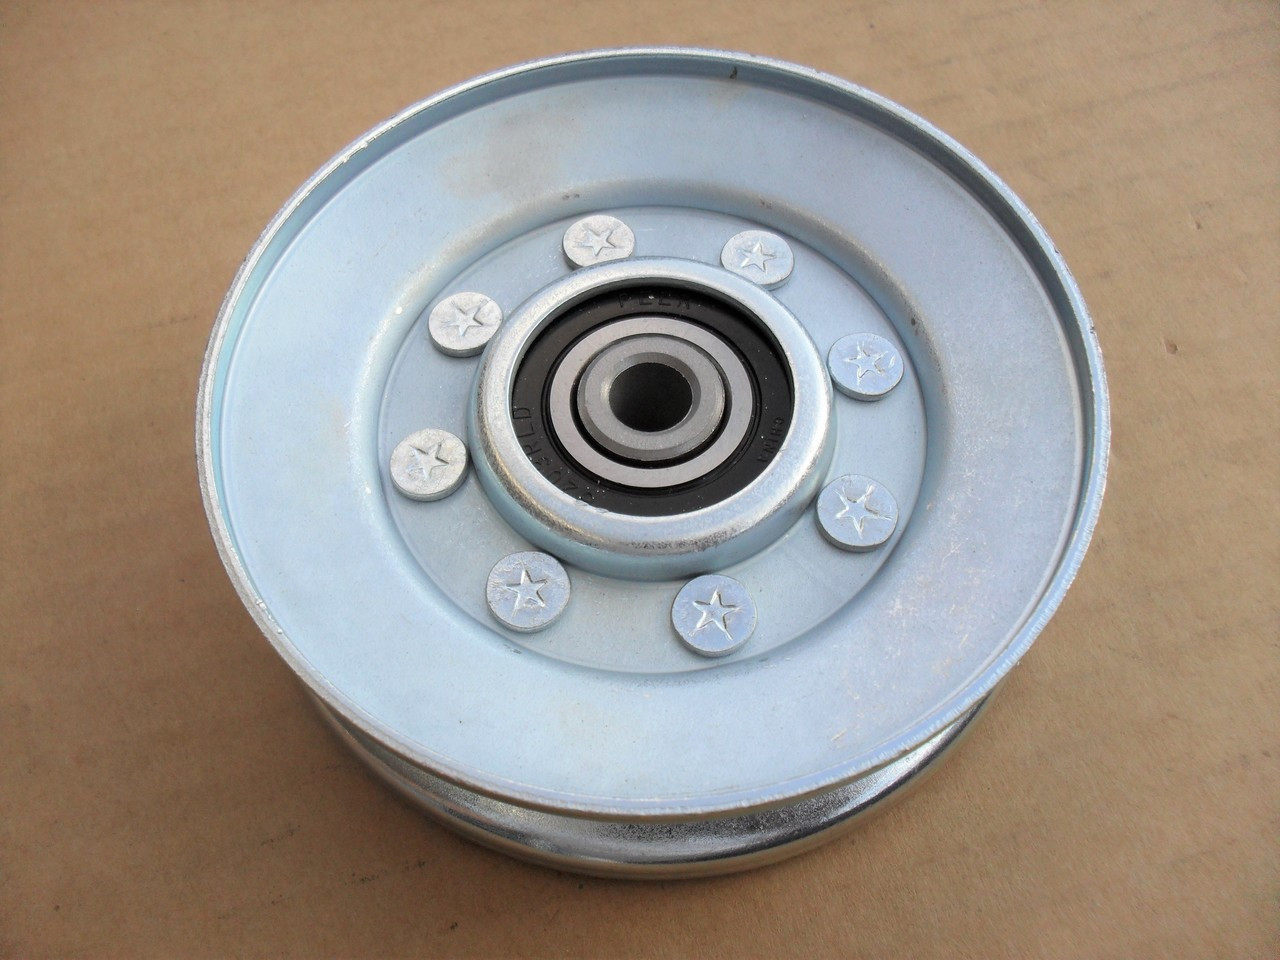 Idler Pulley for Gravely Pro Master 250Z 260Z 7325200 ID: 3/8" OD: 4" Height: 3/4"